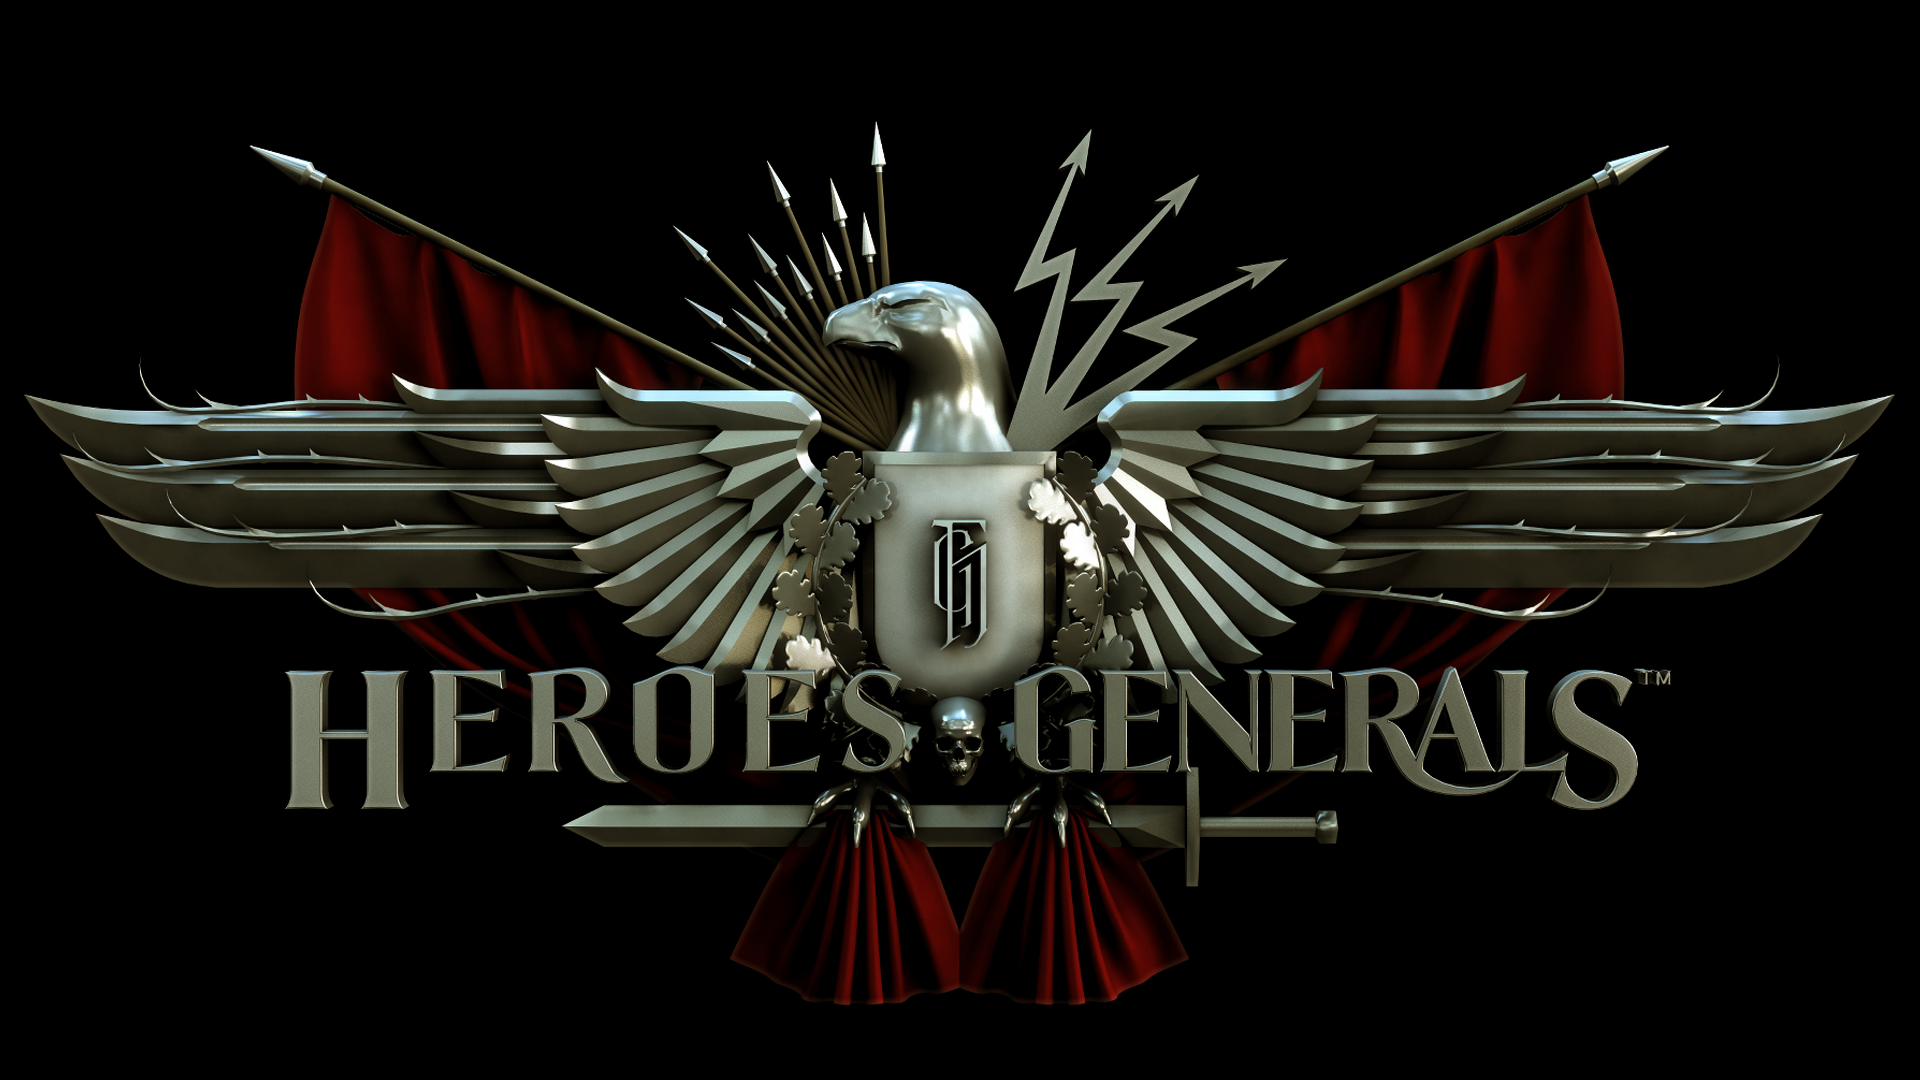 General 1920x1080 video games Heroes & Generals simple background PC gaming